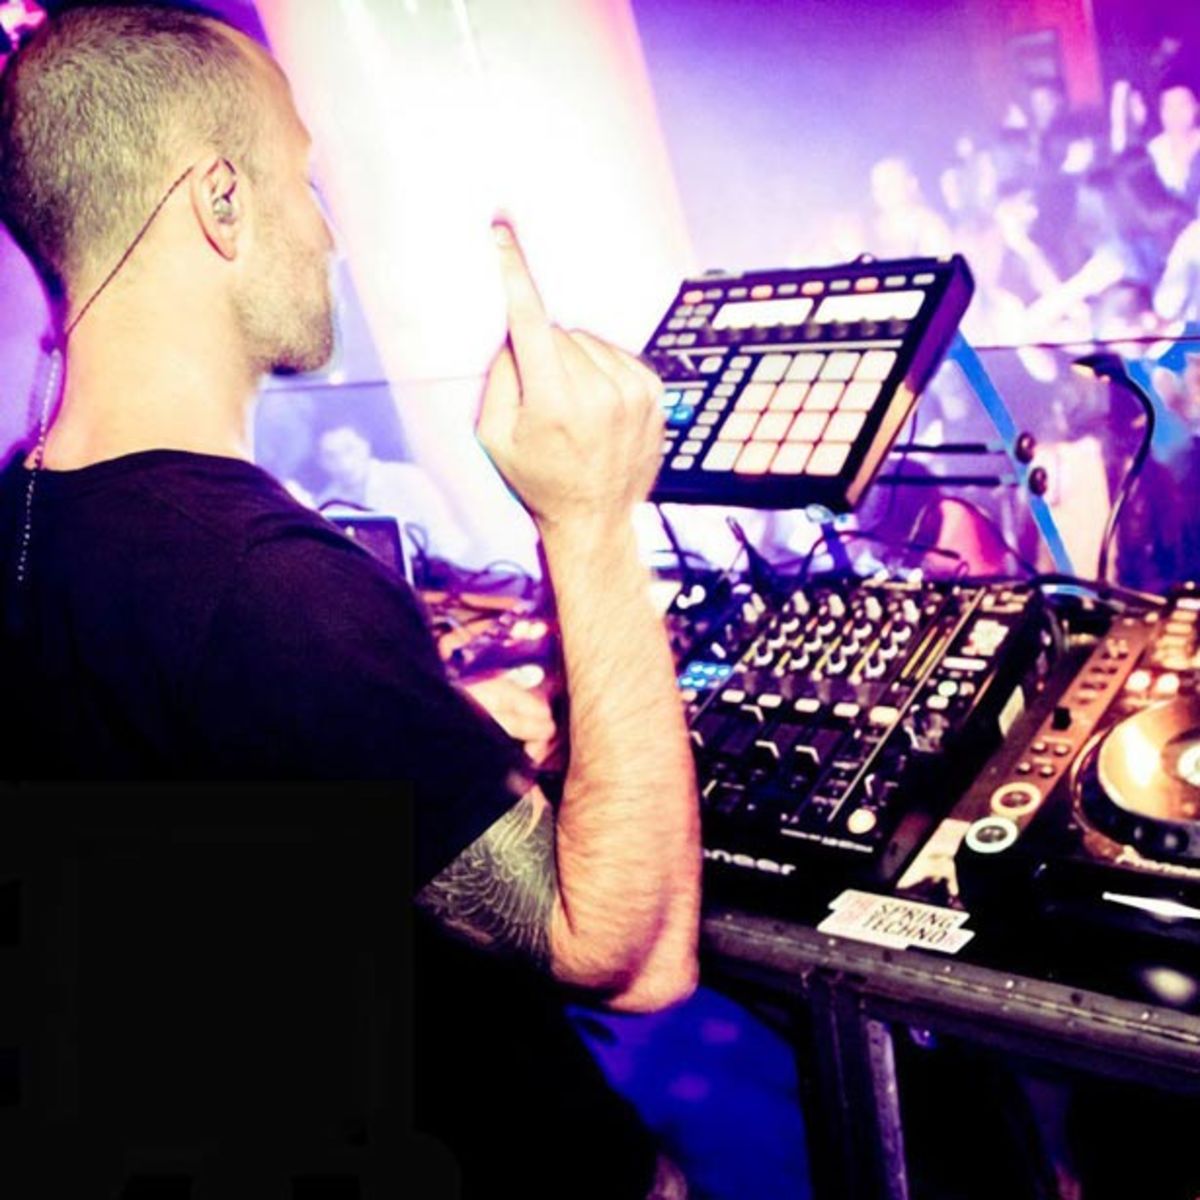 Watch: Bass Kleph Live Maschine at Foundation in Seattle. File This Under Awesomeness